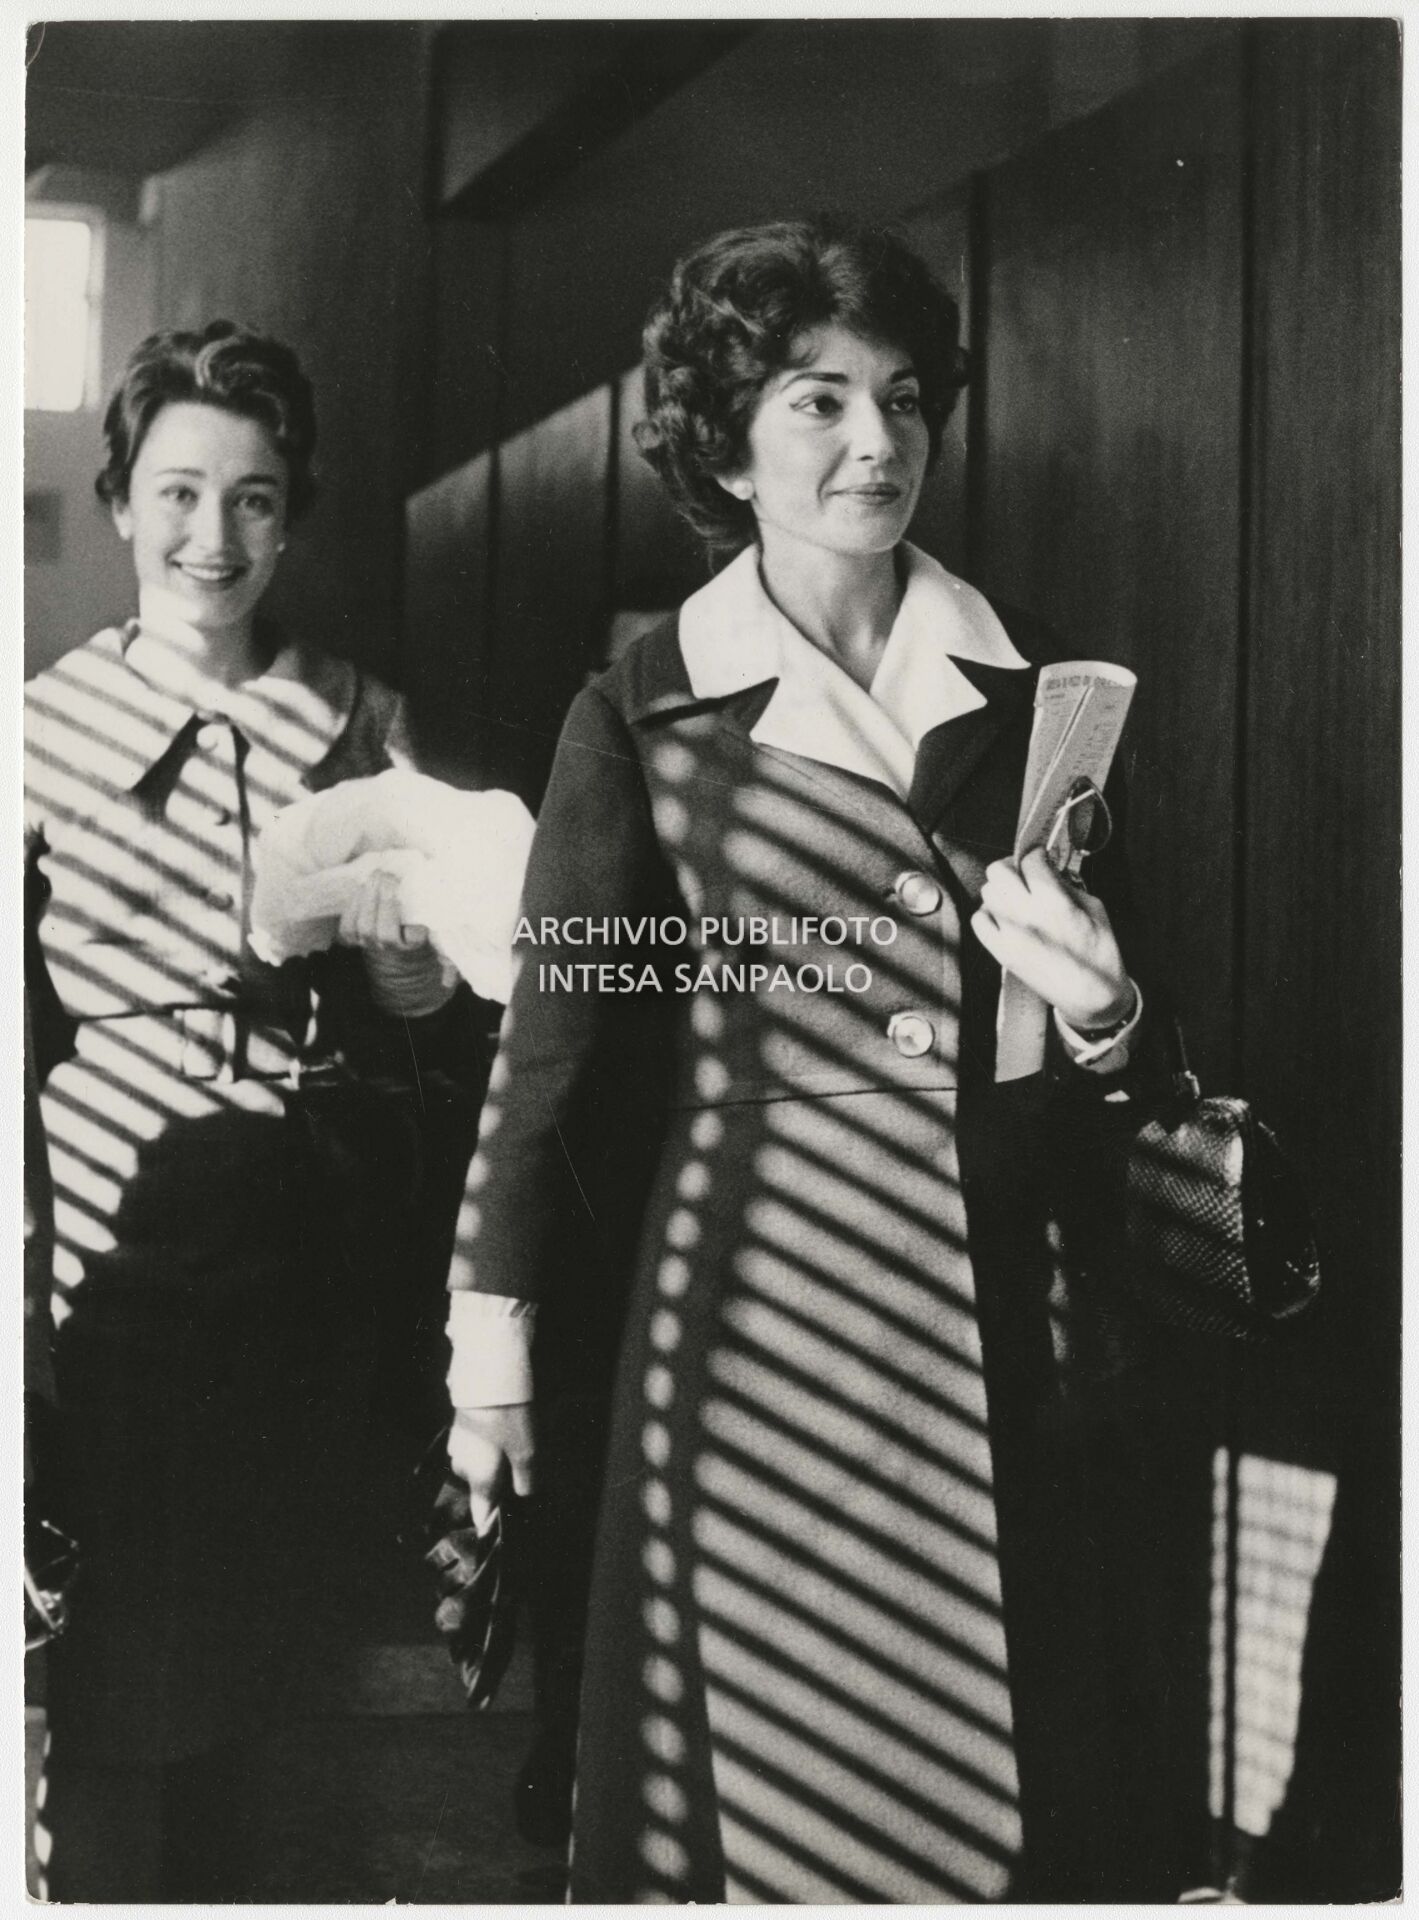 Maria Callas at Malpensa airport, leaving for London, accompanied by her friend Giovanna Lomazzi